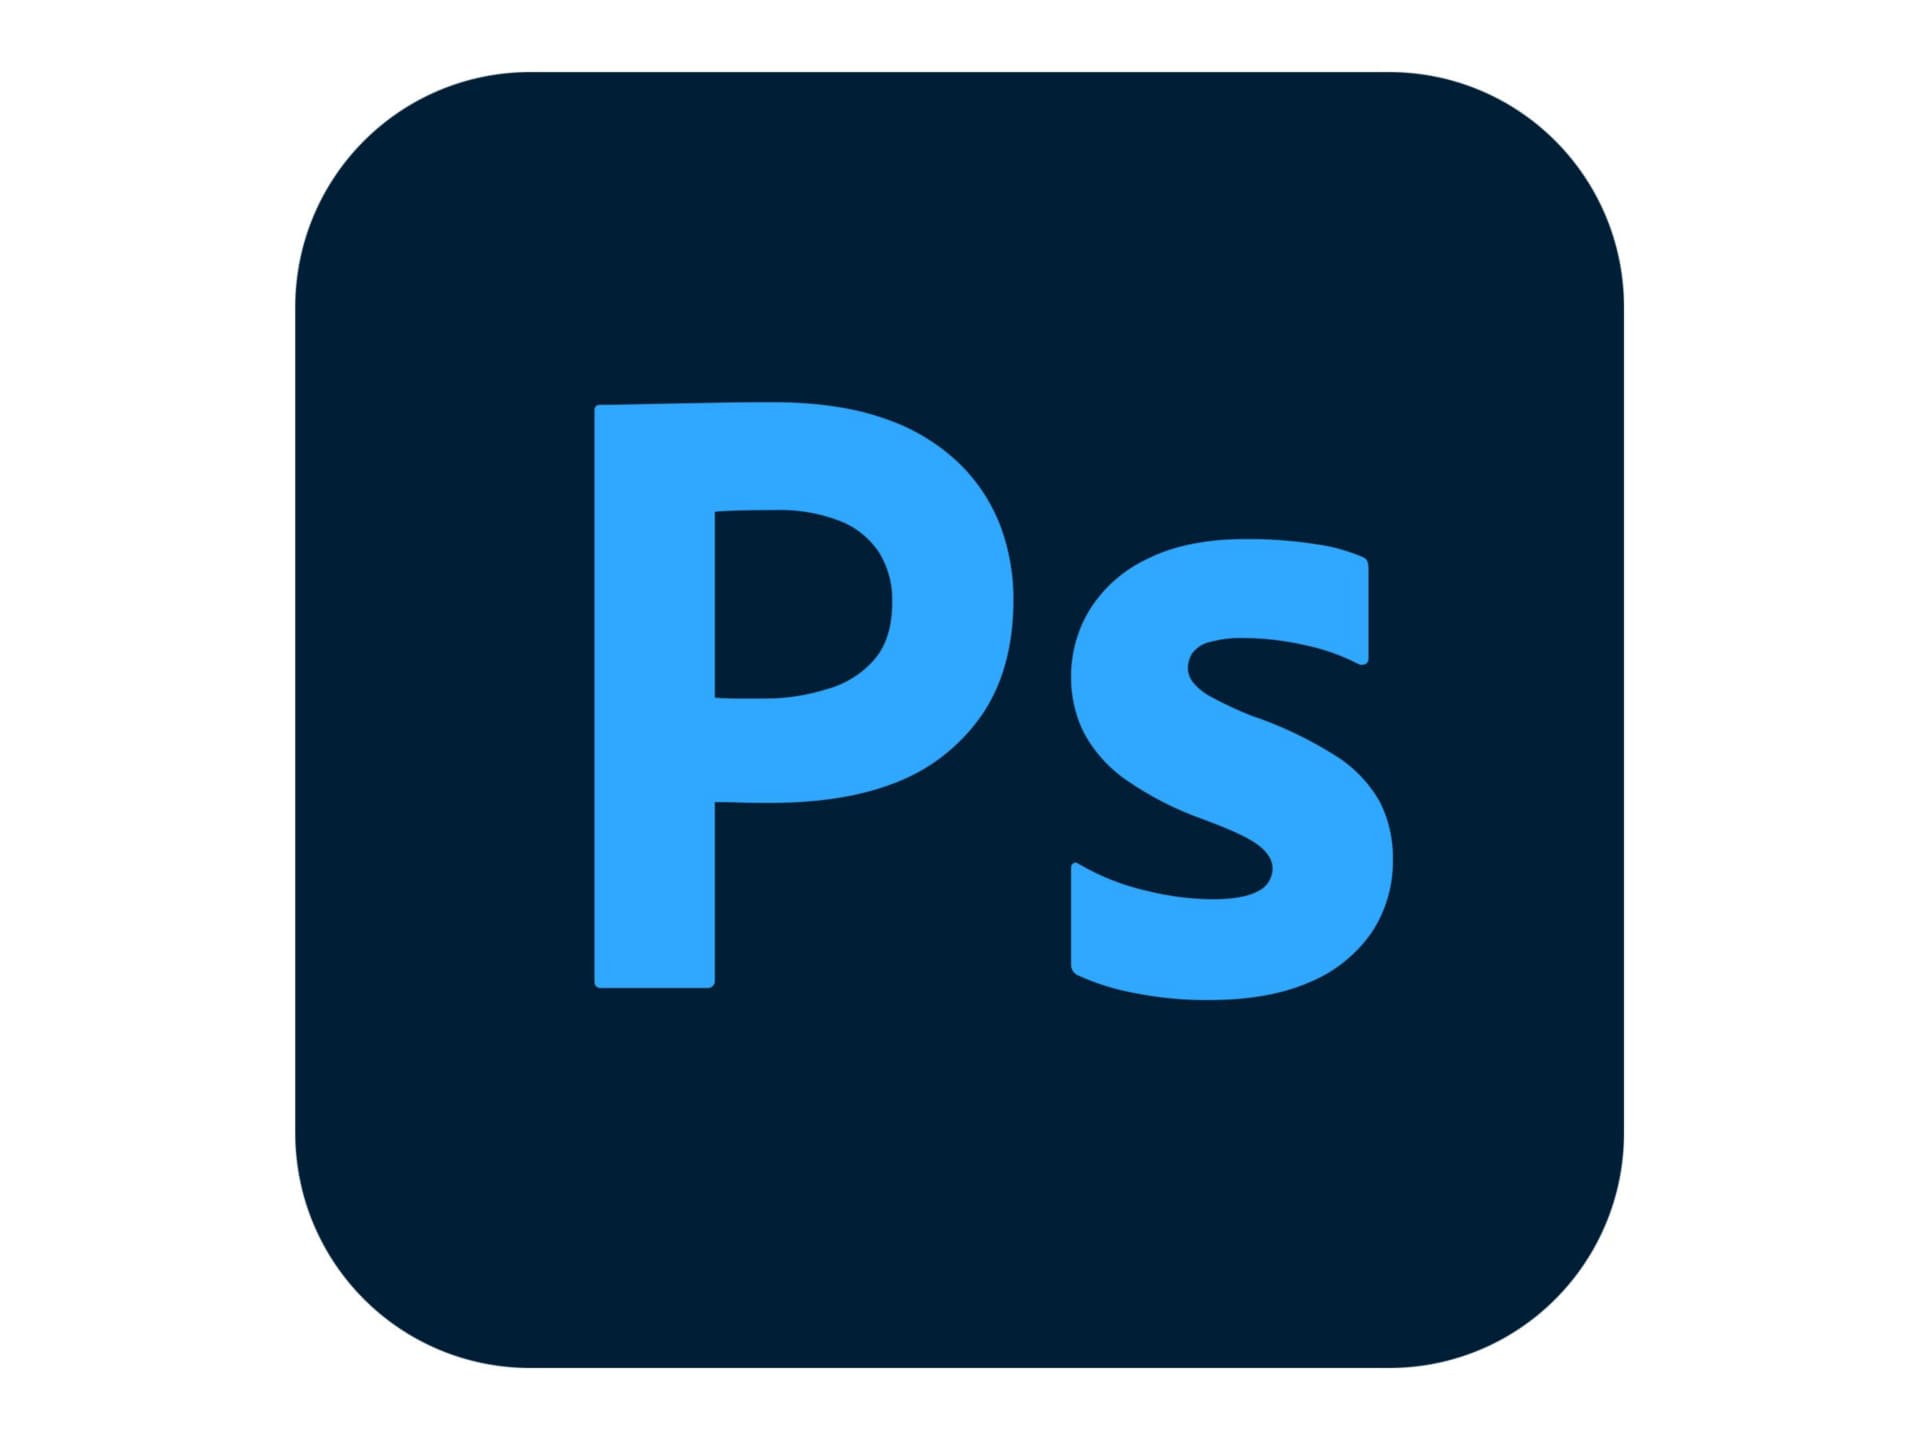 Adobe Photoshop for teams - Subscription New (annual) - 1 user